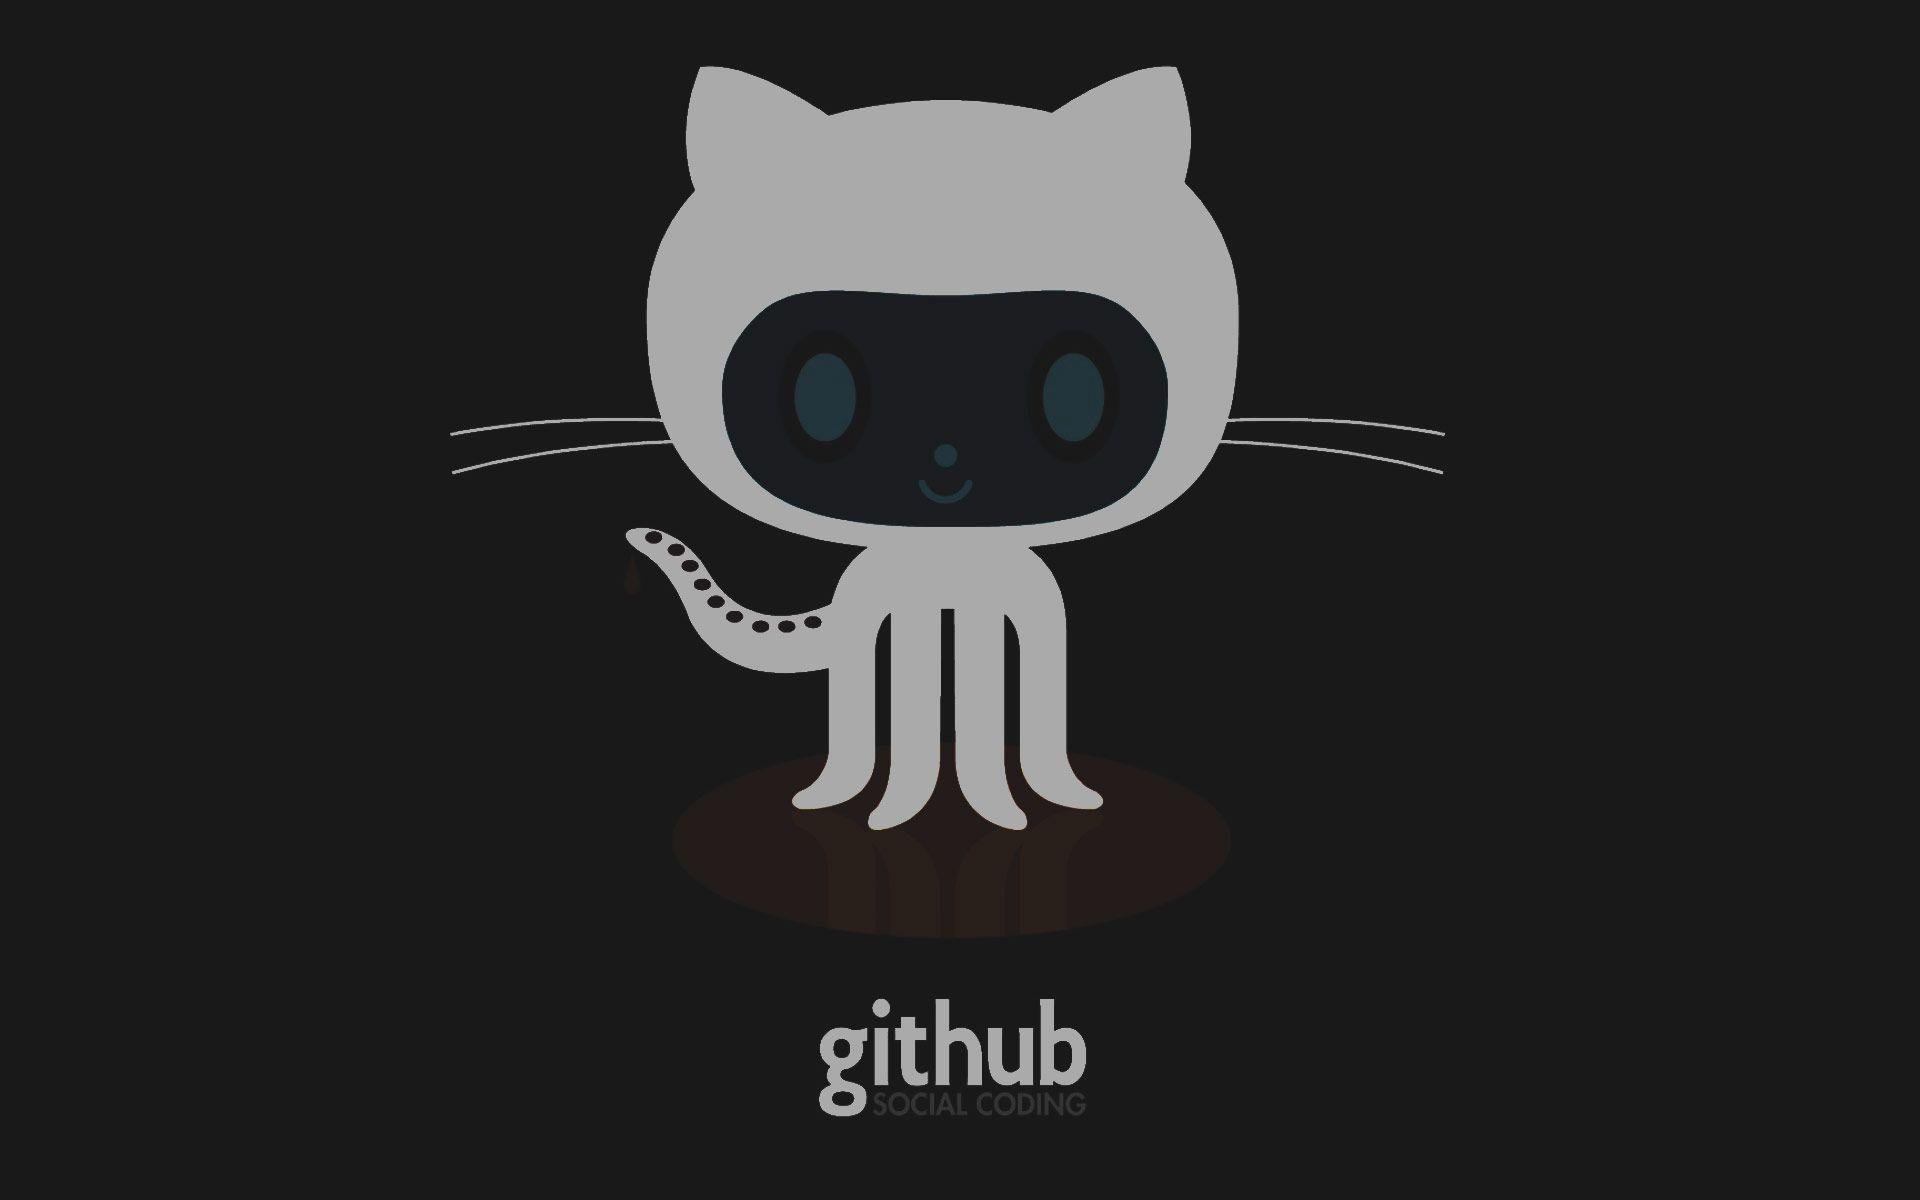 Wallpaper Android Github Gadget and PC Wallpaper